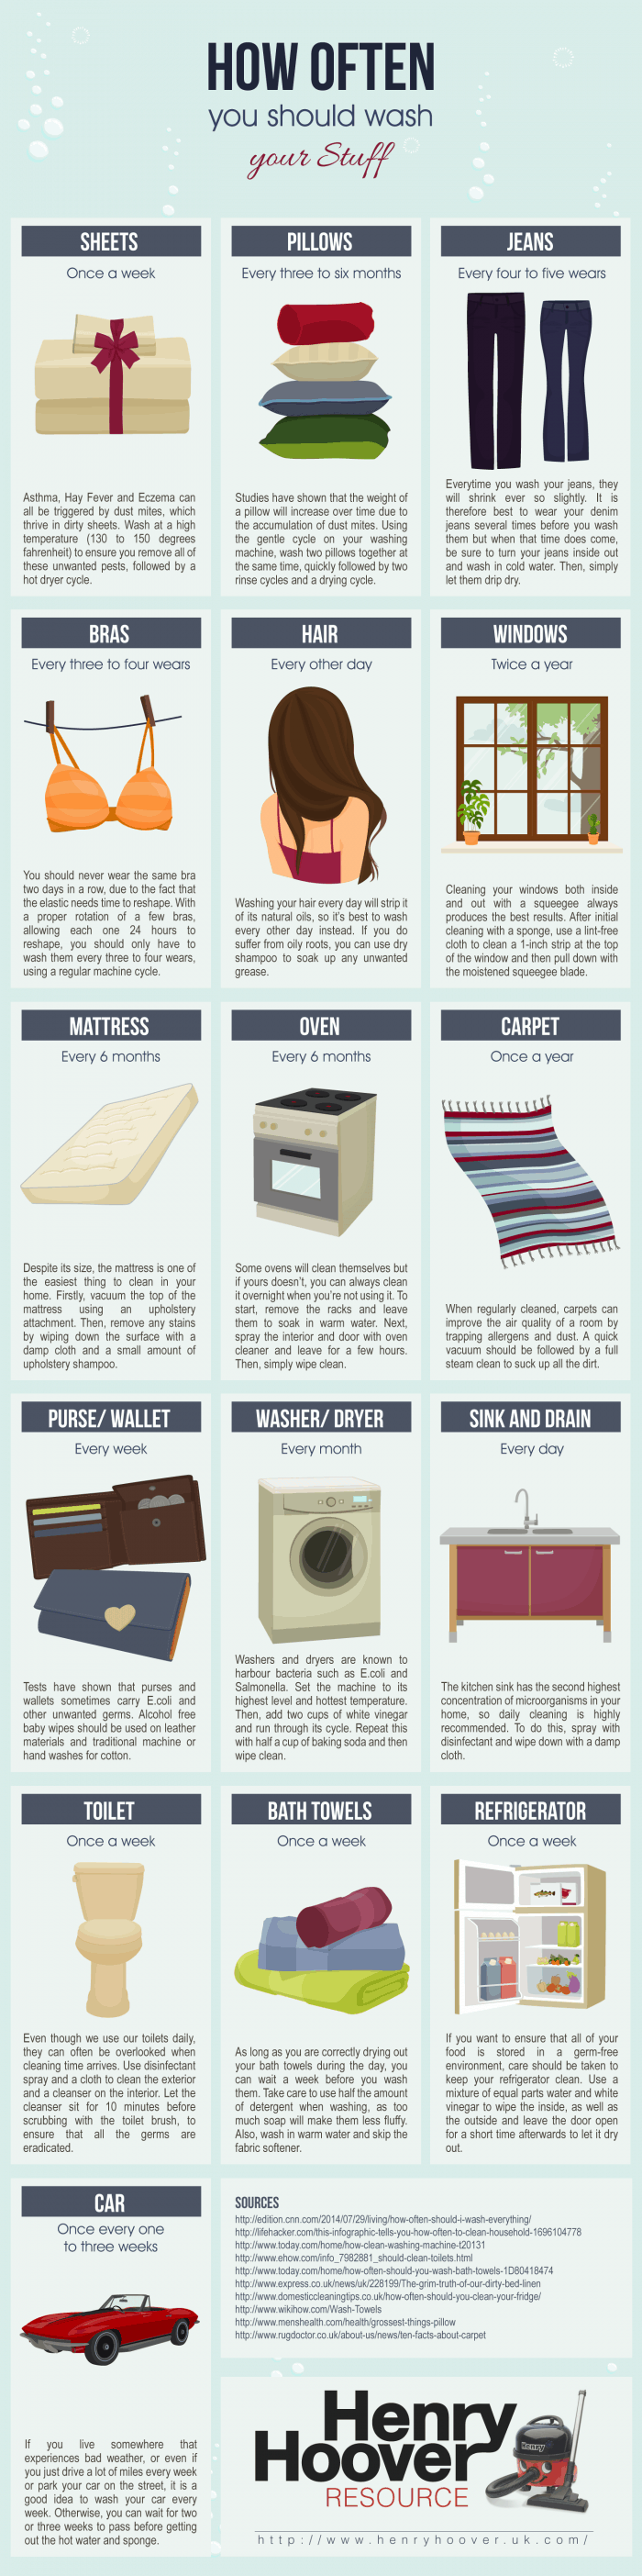 infographic describes how often you should wash your shirt, wash your sheets, clean your mattress, clean your car, clean the oven and clean the windows